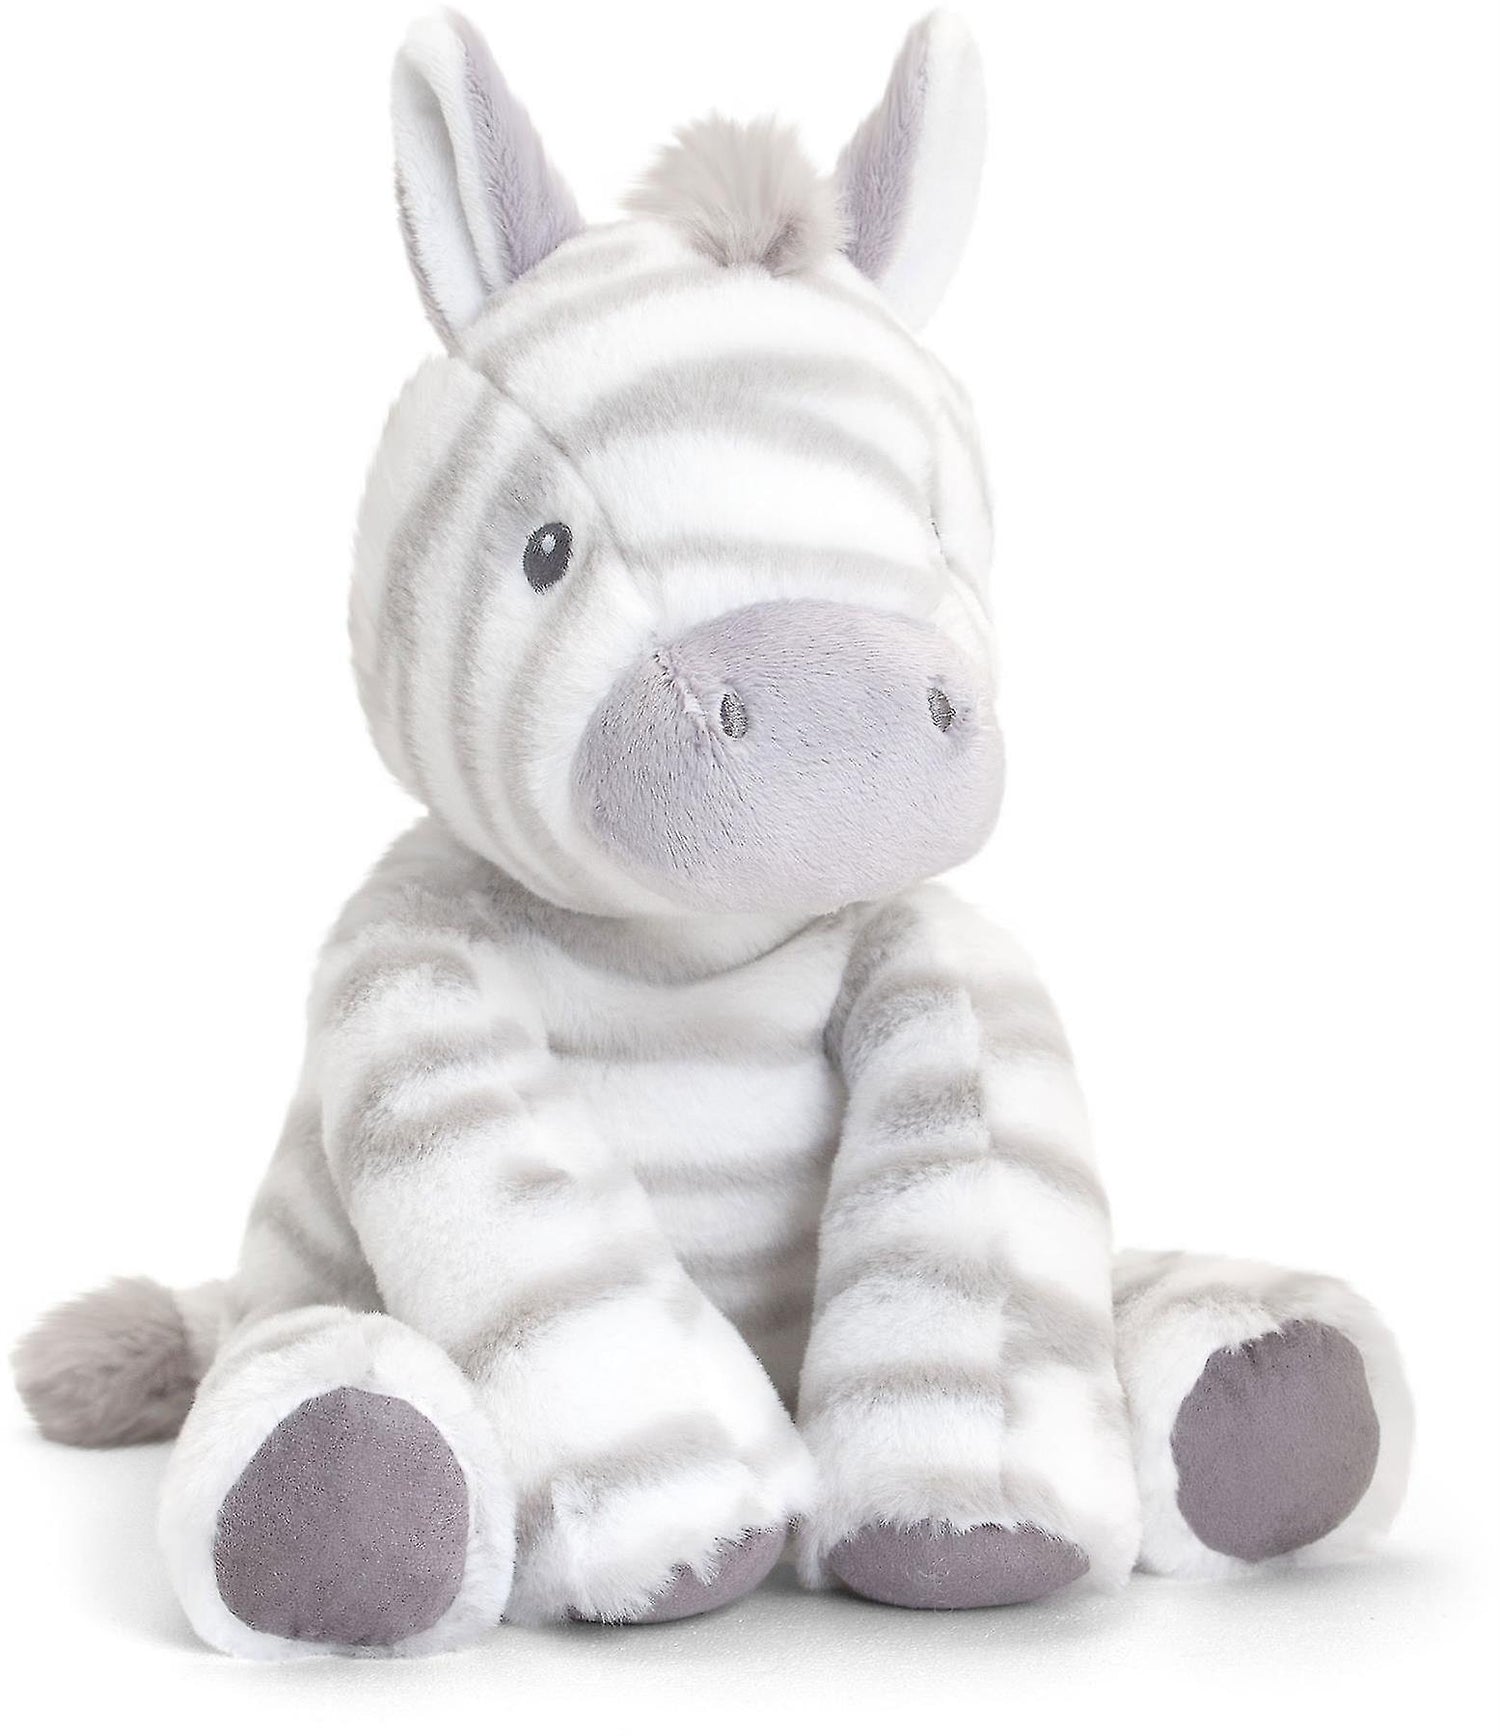 A 25cm Keeleco soft baby toy zebra in white and grey.